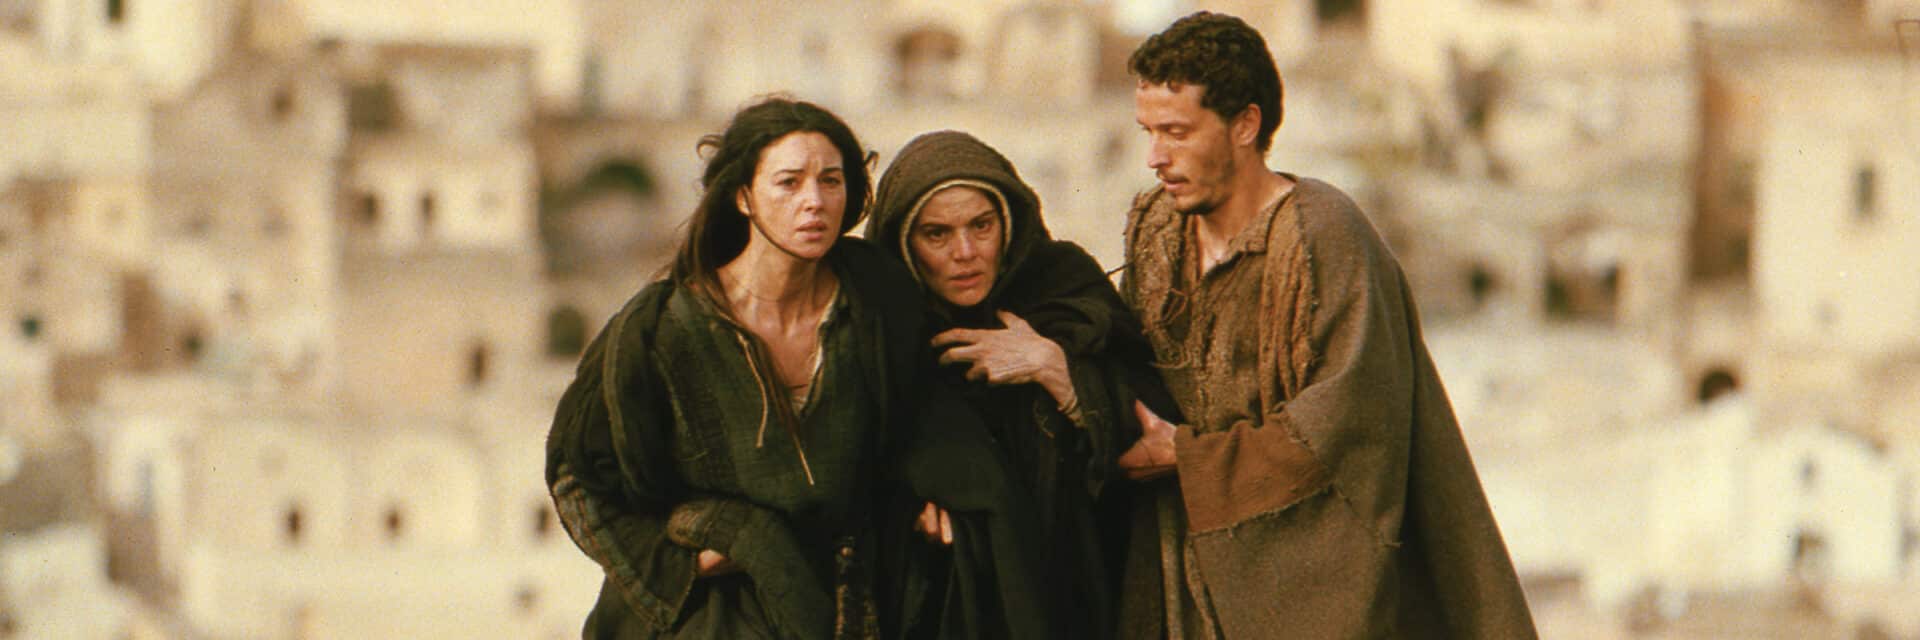 49 Top Photos Passion Of Christ Movie Review / The Passion of the Christ by Mel Gibson |James Caviezel ...